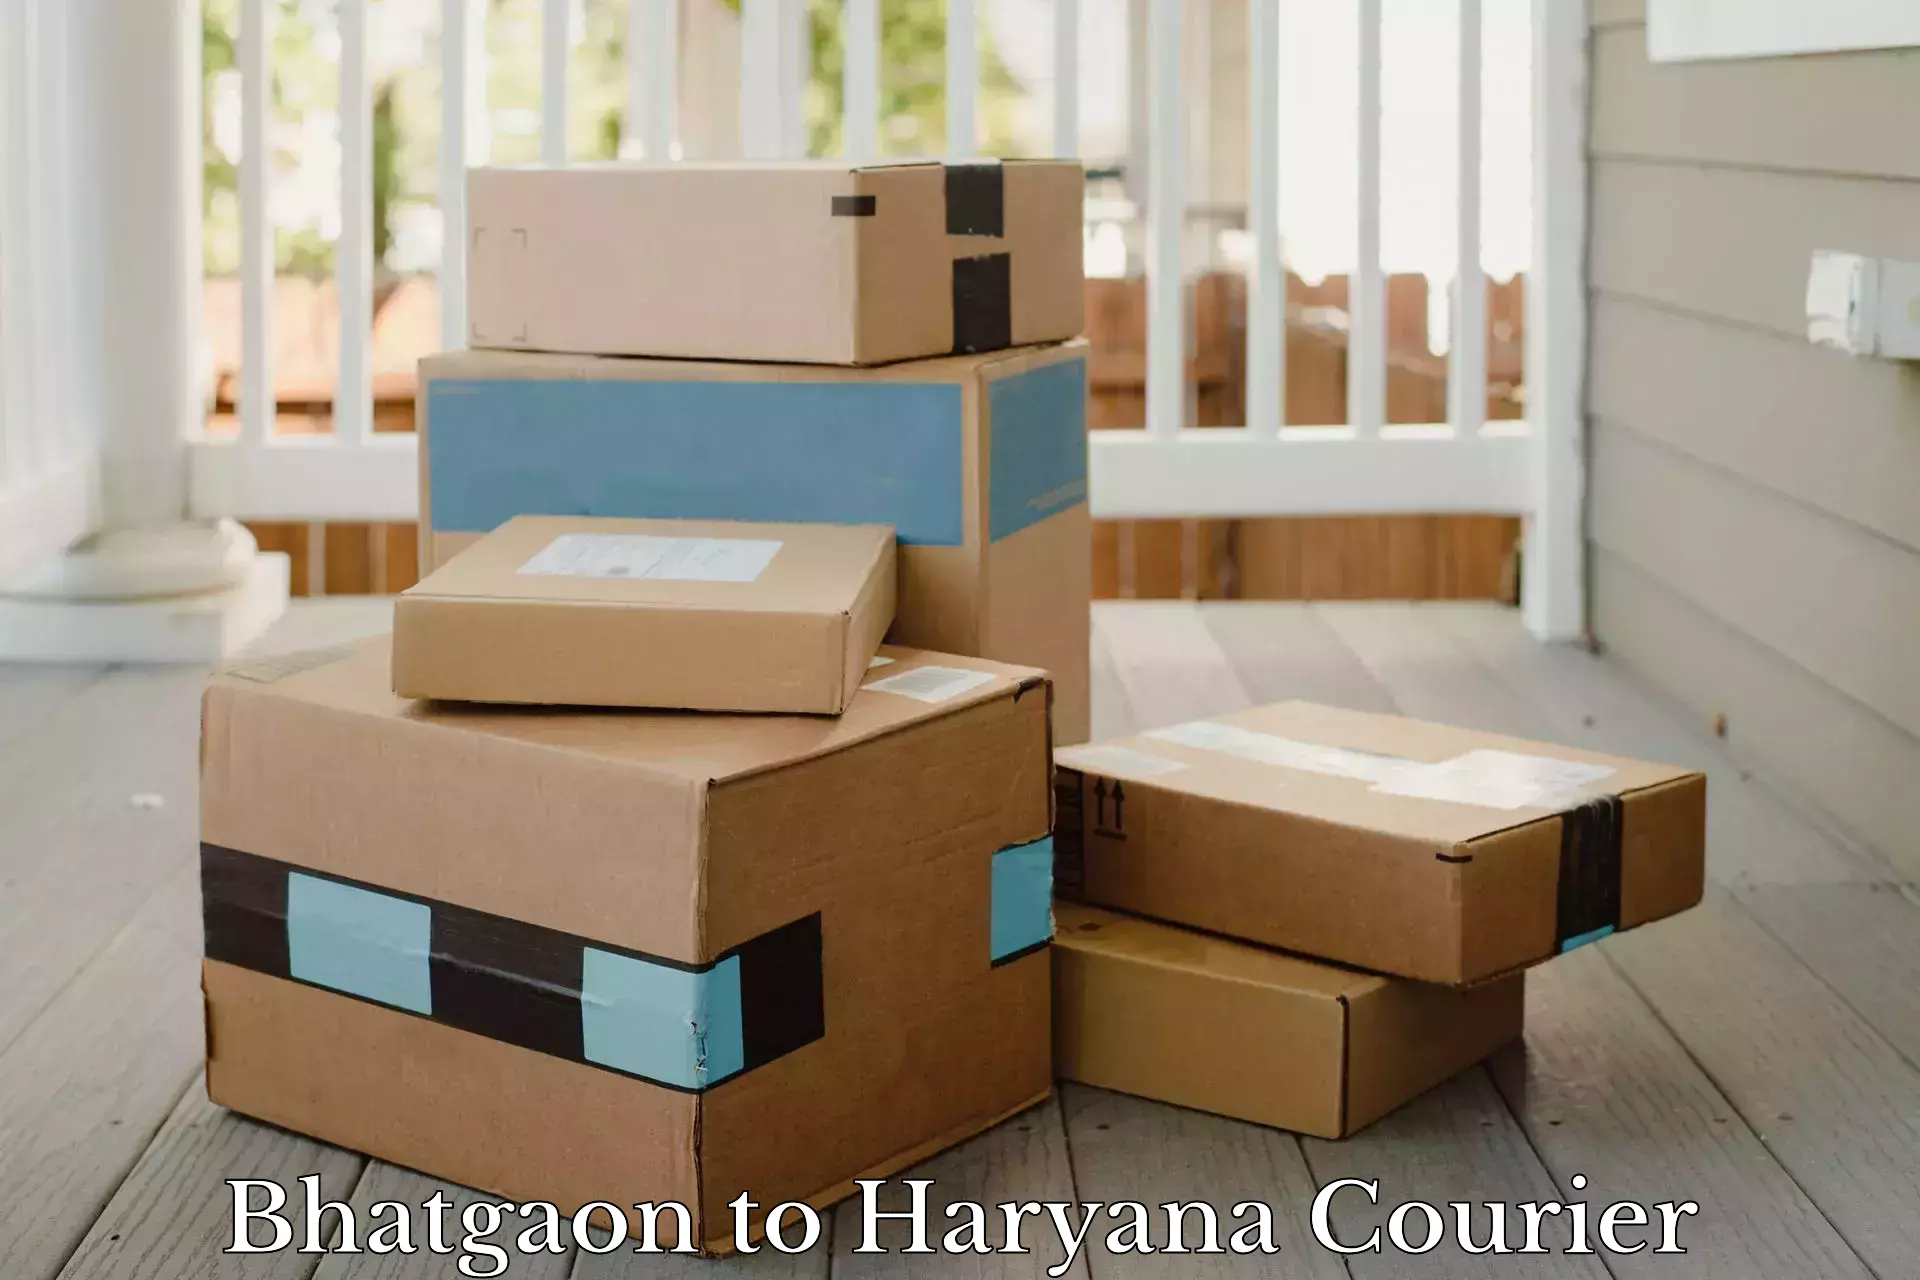 Supply chain delivery in Bhatgaon to Hansi